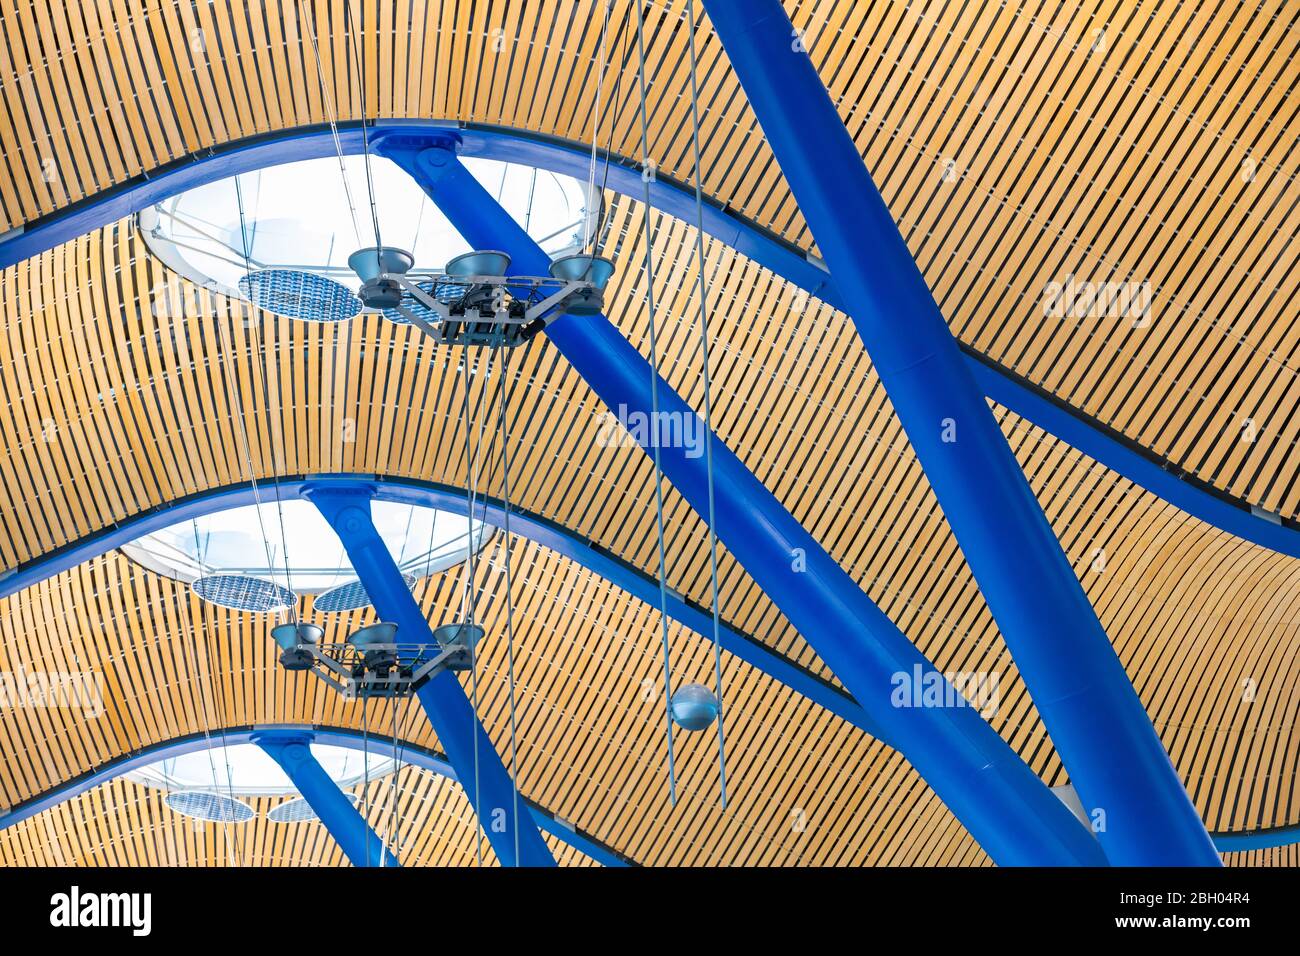 Close up of the vault of the Madrid Airport, made of blue steel and wooden boards, and with skylight windows Stock Photo